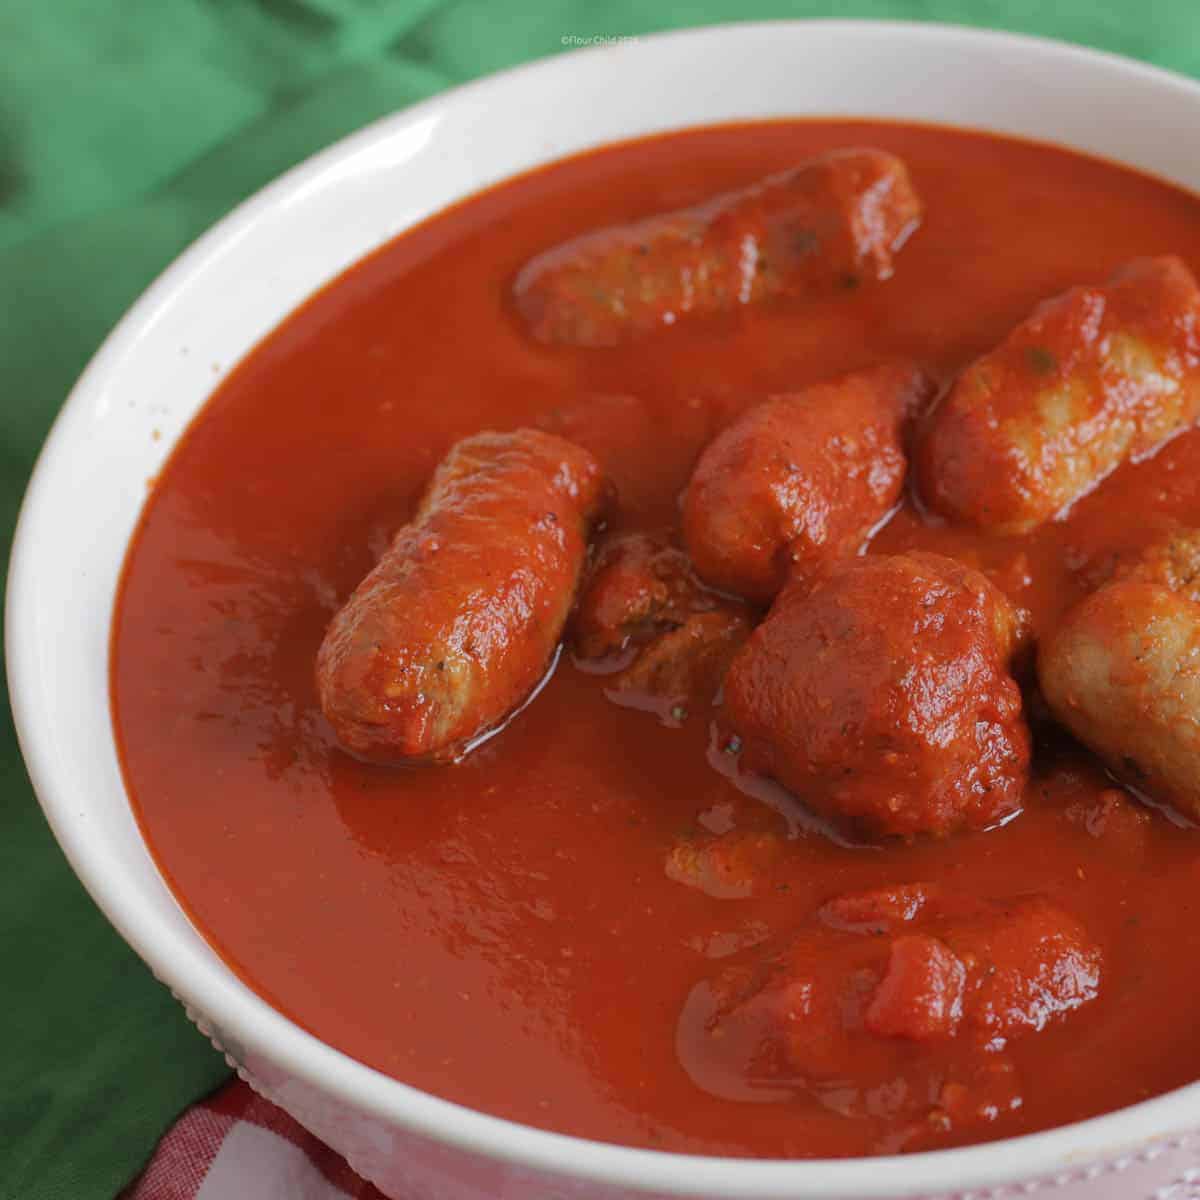 A bowl of red authentic Italian Sunday sauce with meatballs and Italian sausage inside